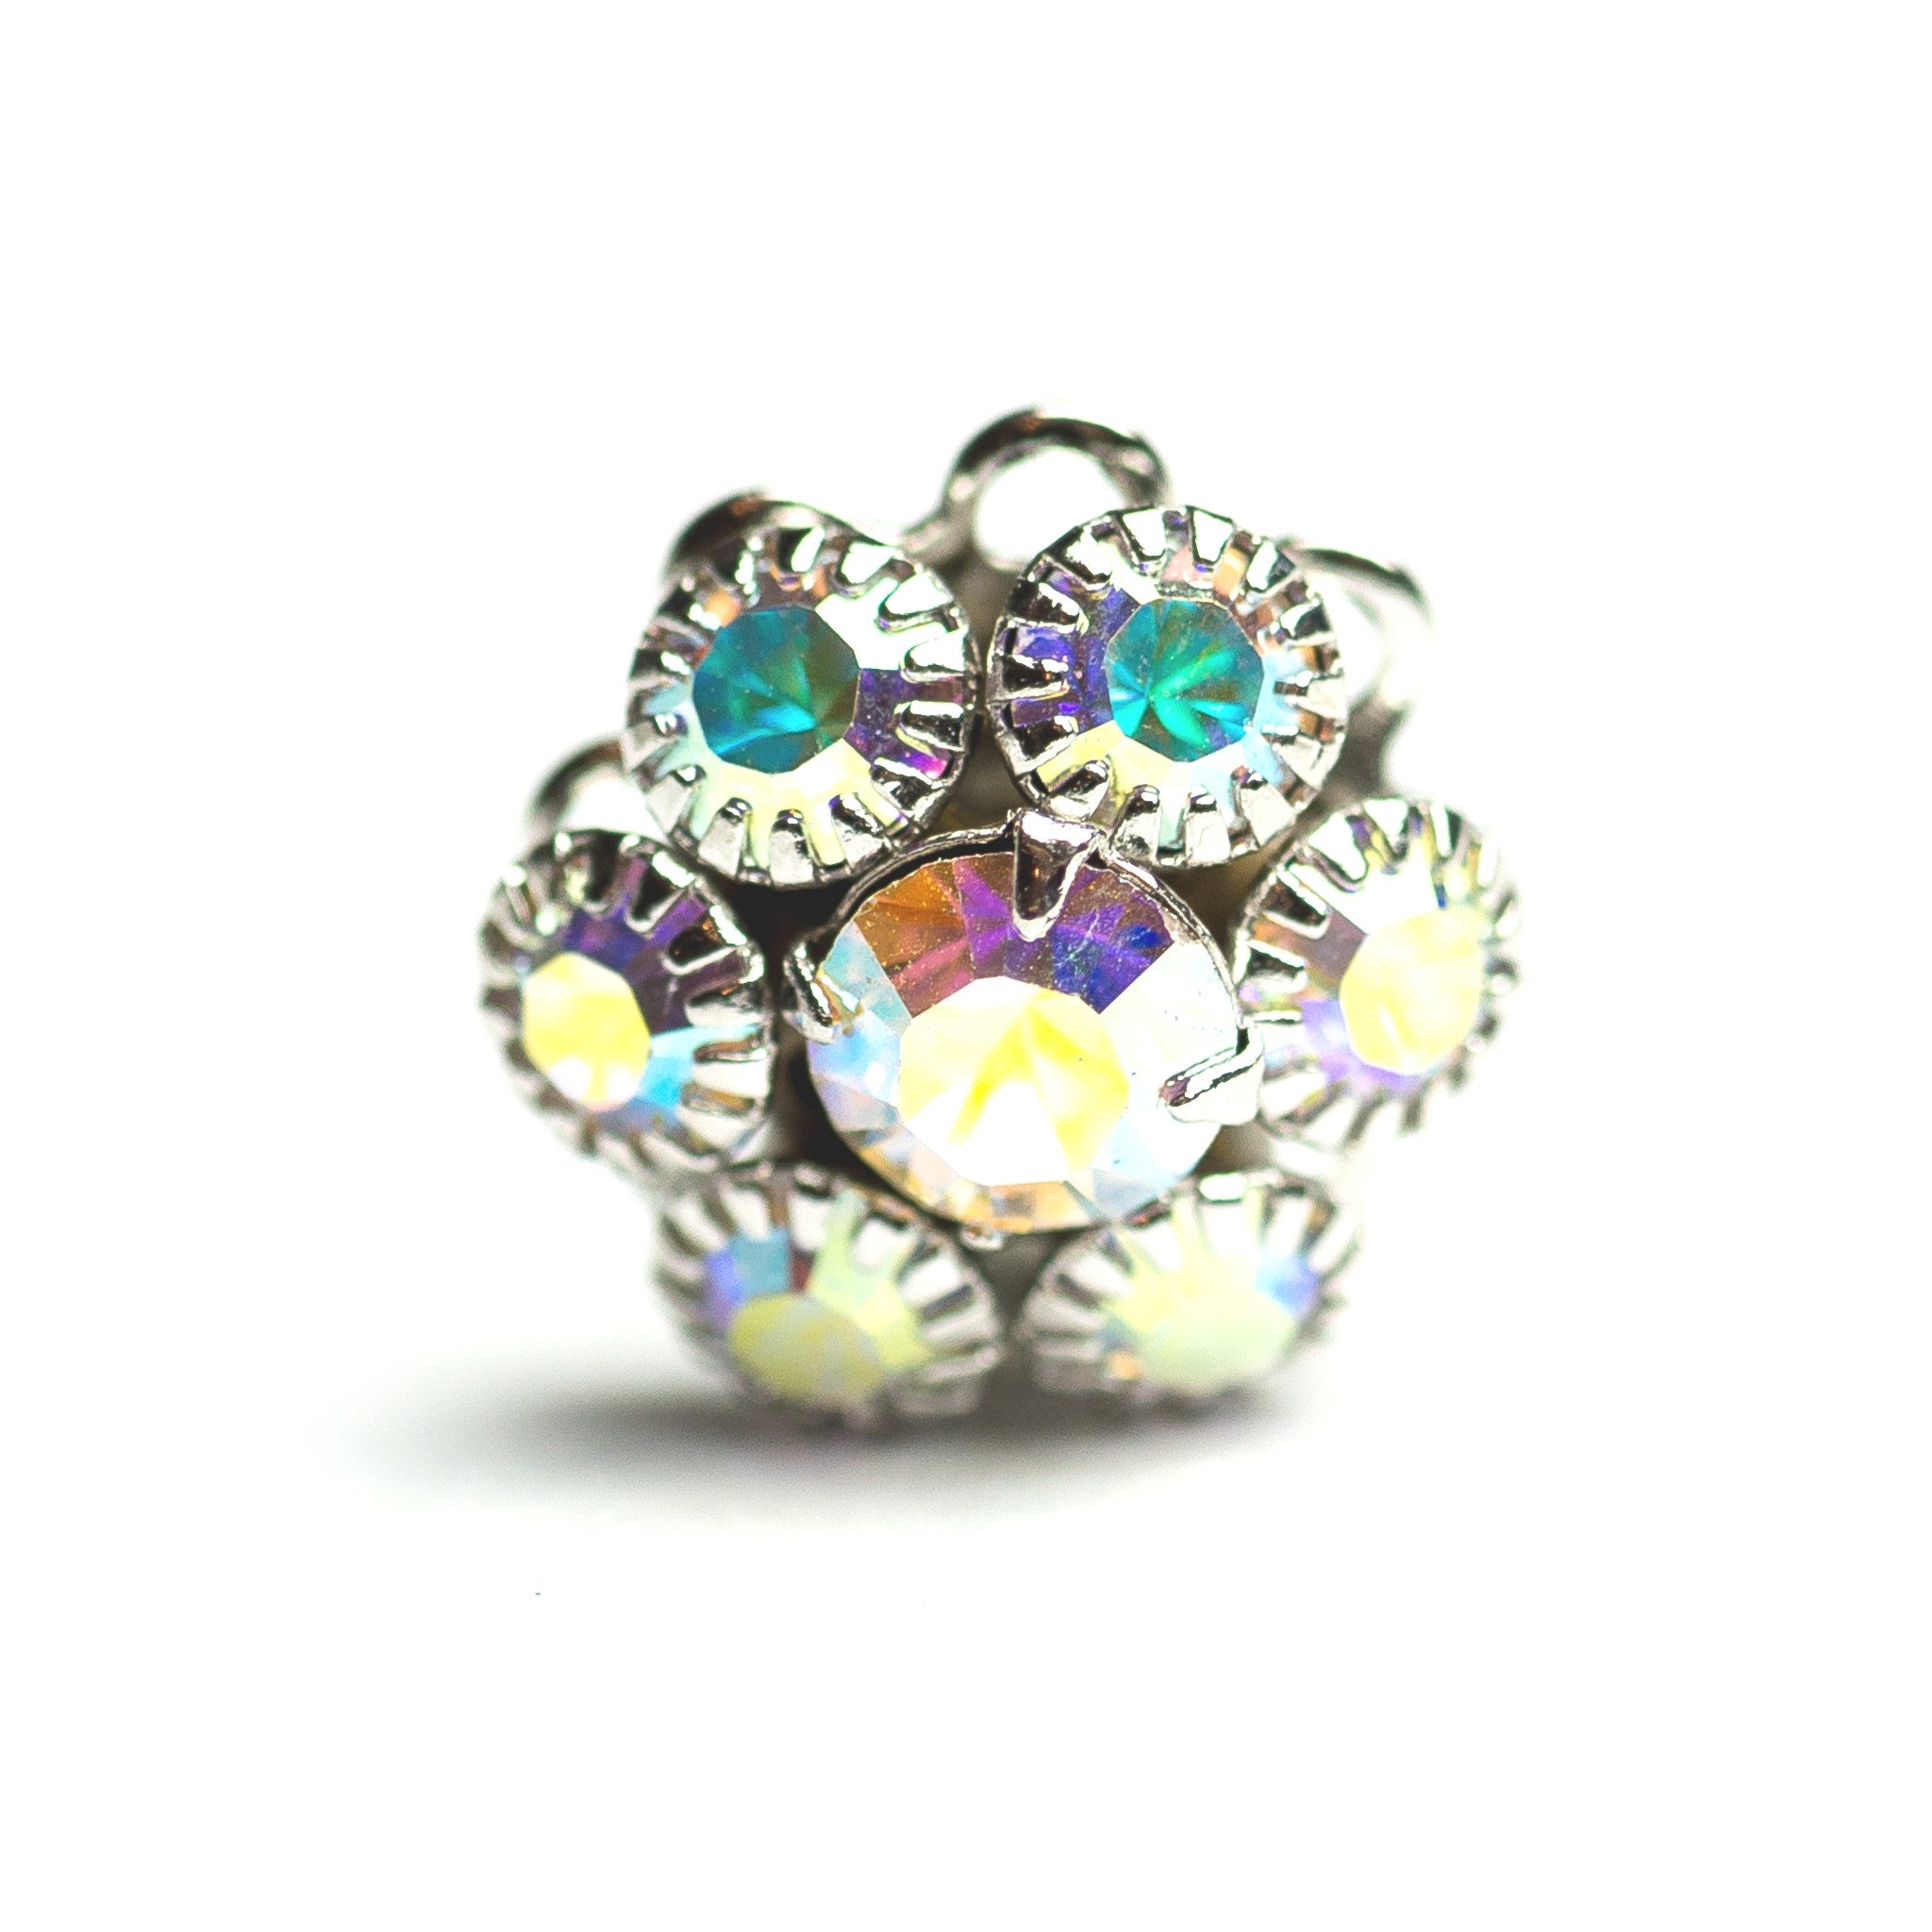 13MM Cluster Button Crystal Ab/Rhodium (2 pieces)